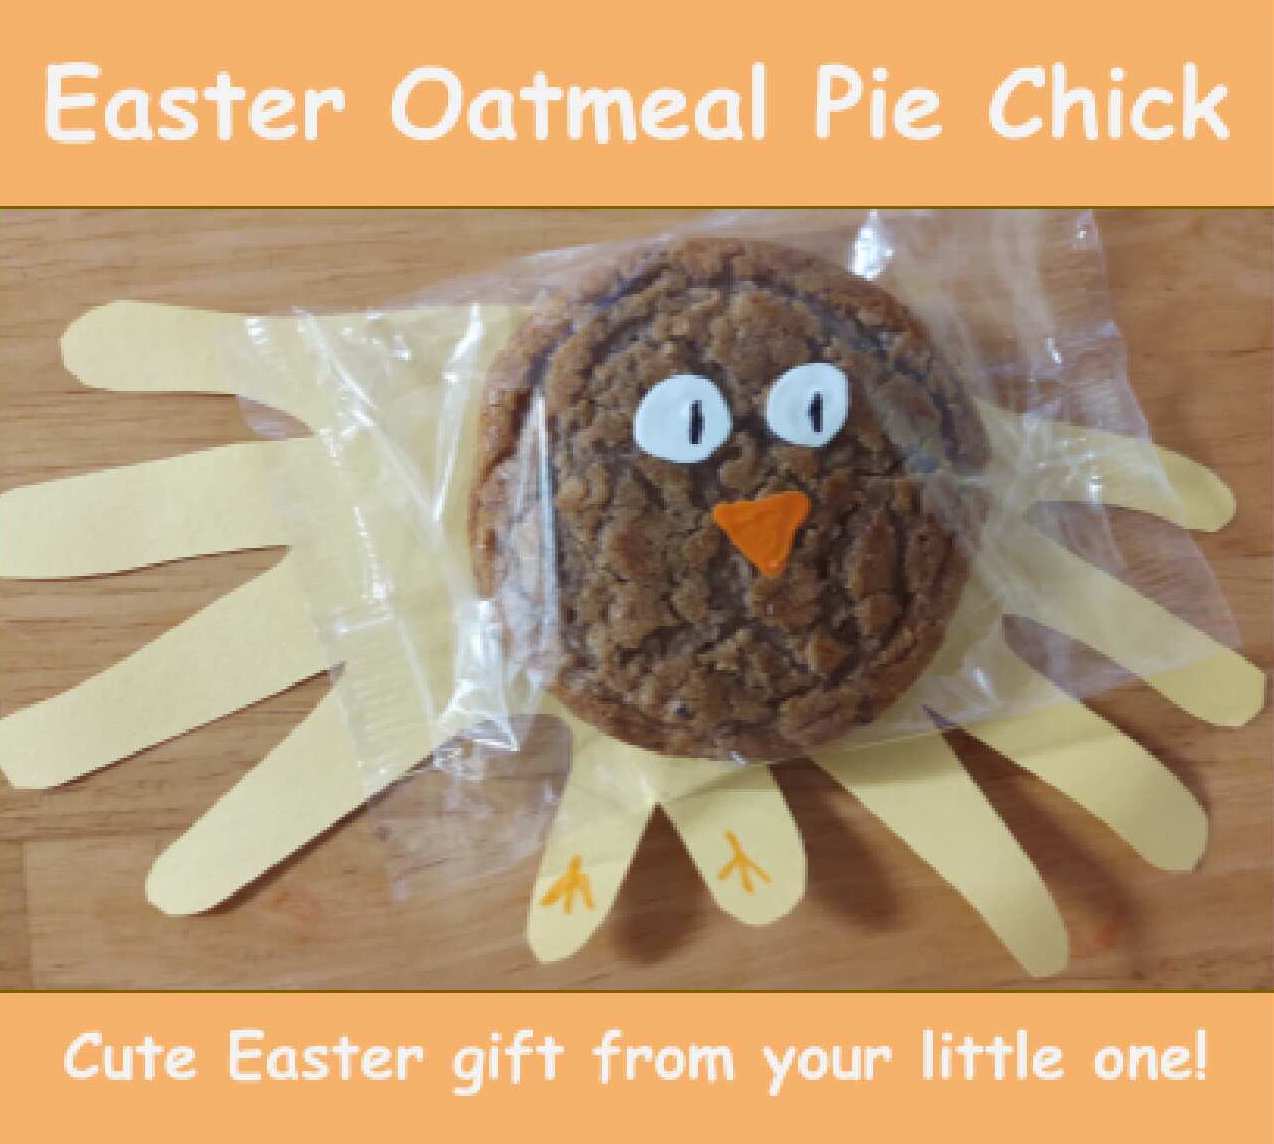 Easter Oatmeal Pie Chick Craft